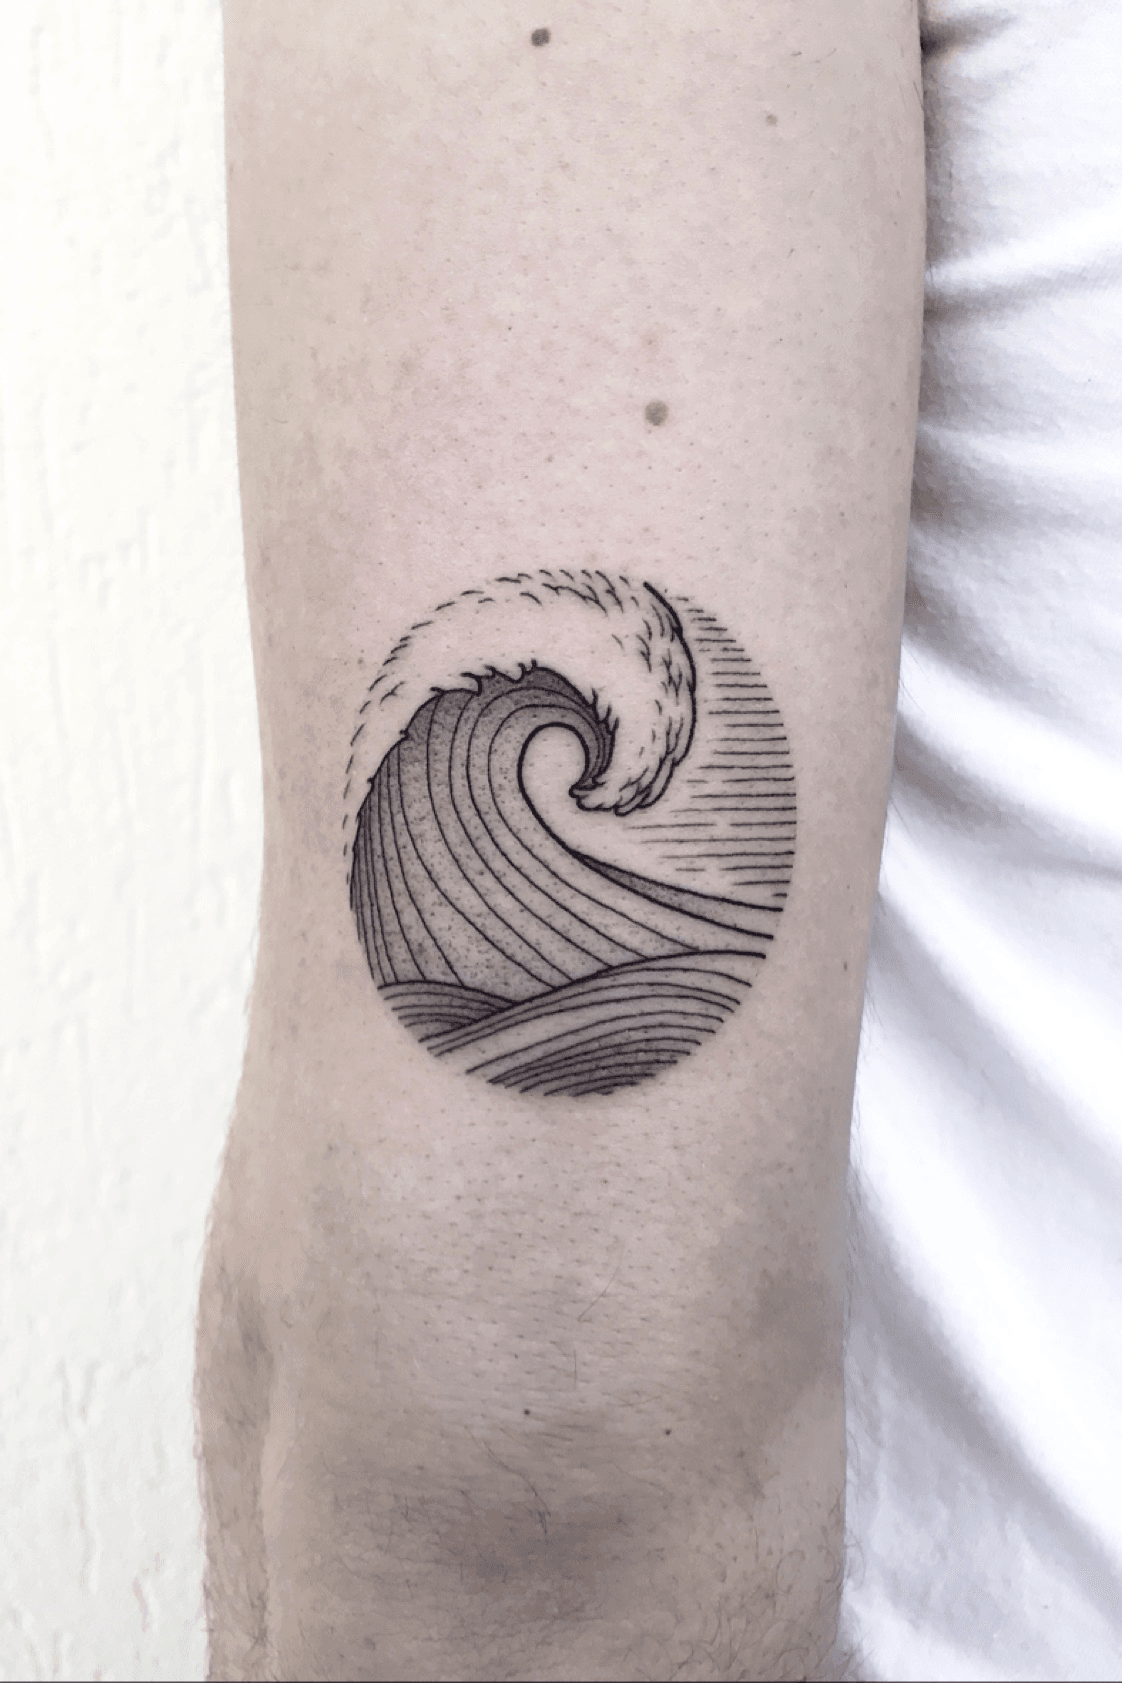 31 Elegant Waves Tattoo Designs For Men and Women That Arent Shabby   Psycho Tats